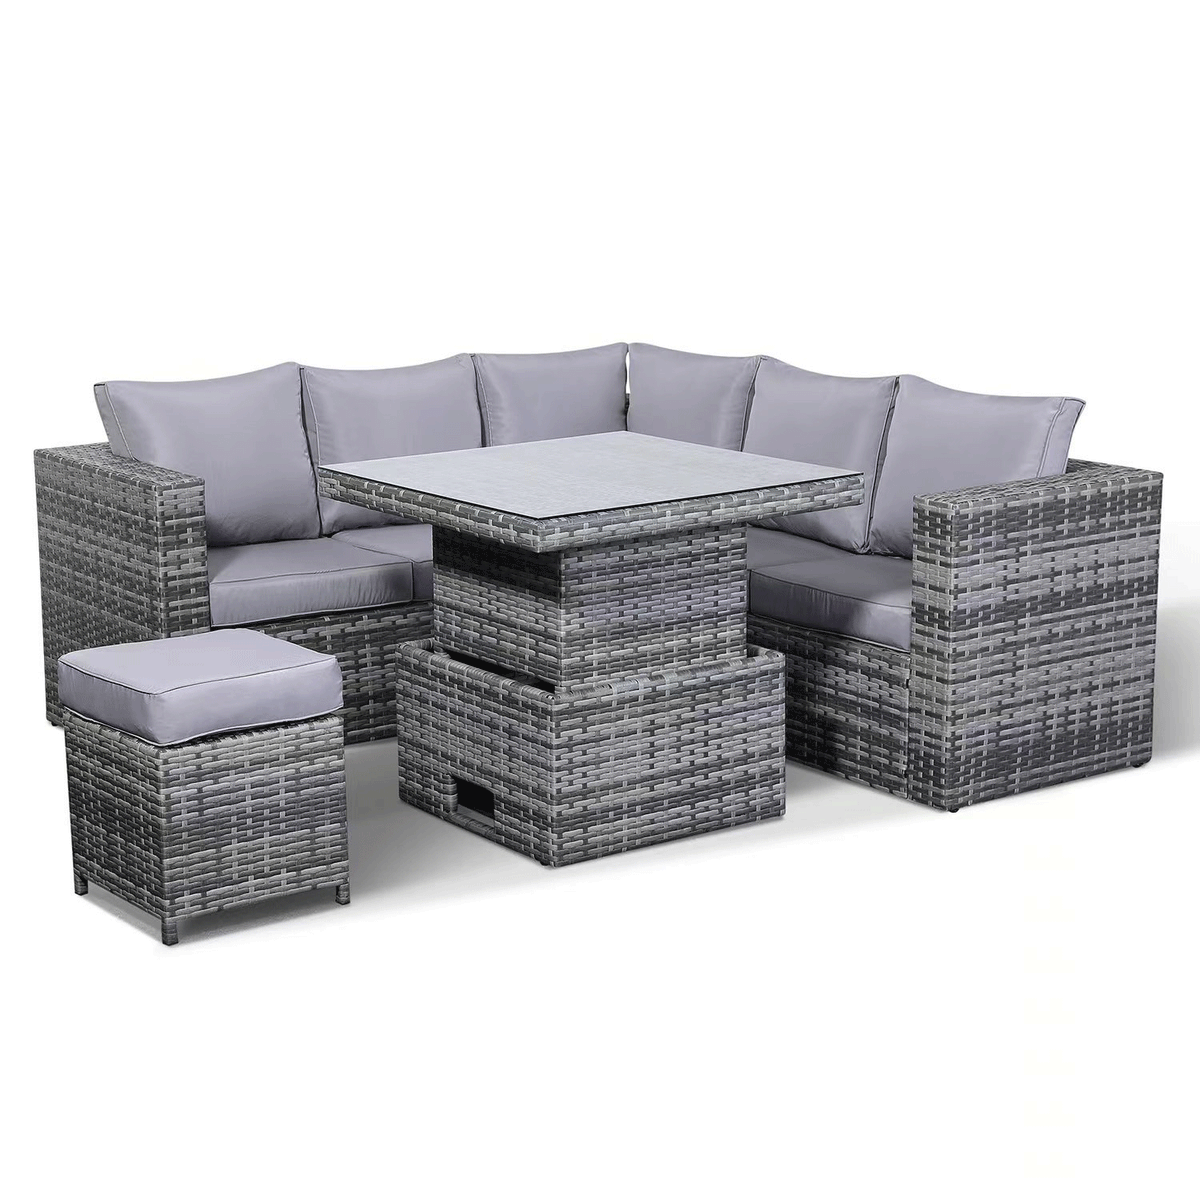 4 Pieces Orlando Range Modular Outdoor Sectional Wicker Patio Furniture with Rising Table and Cushions